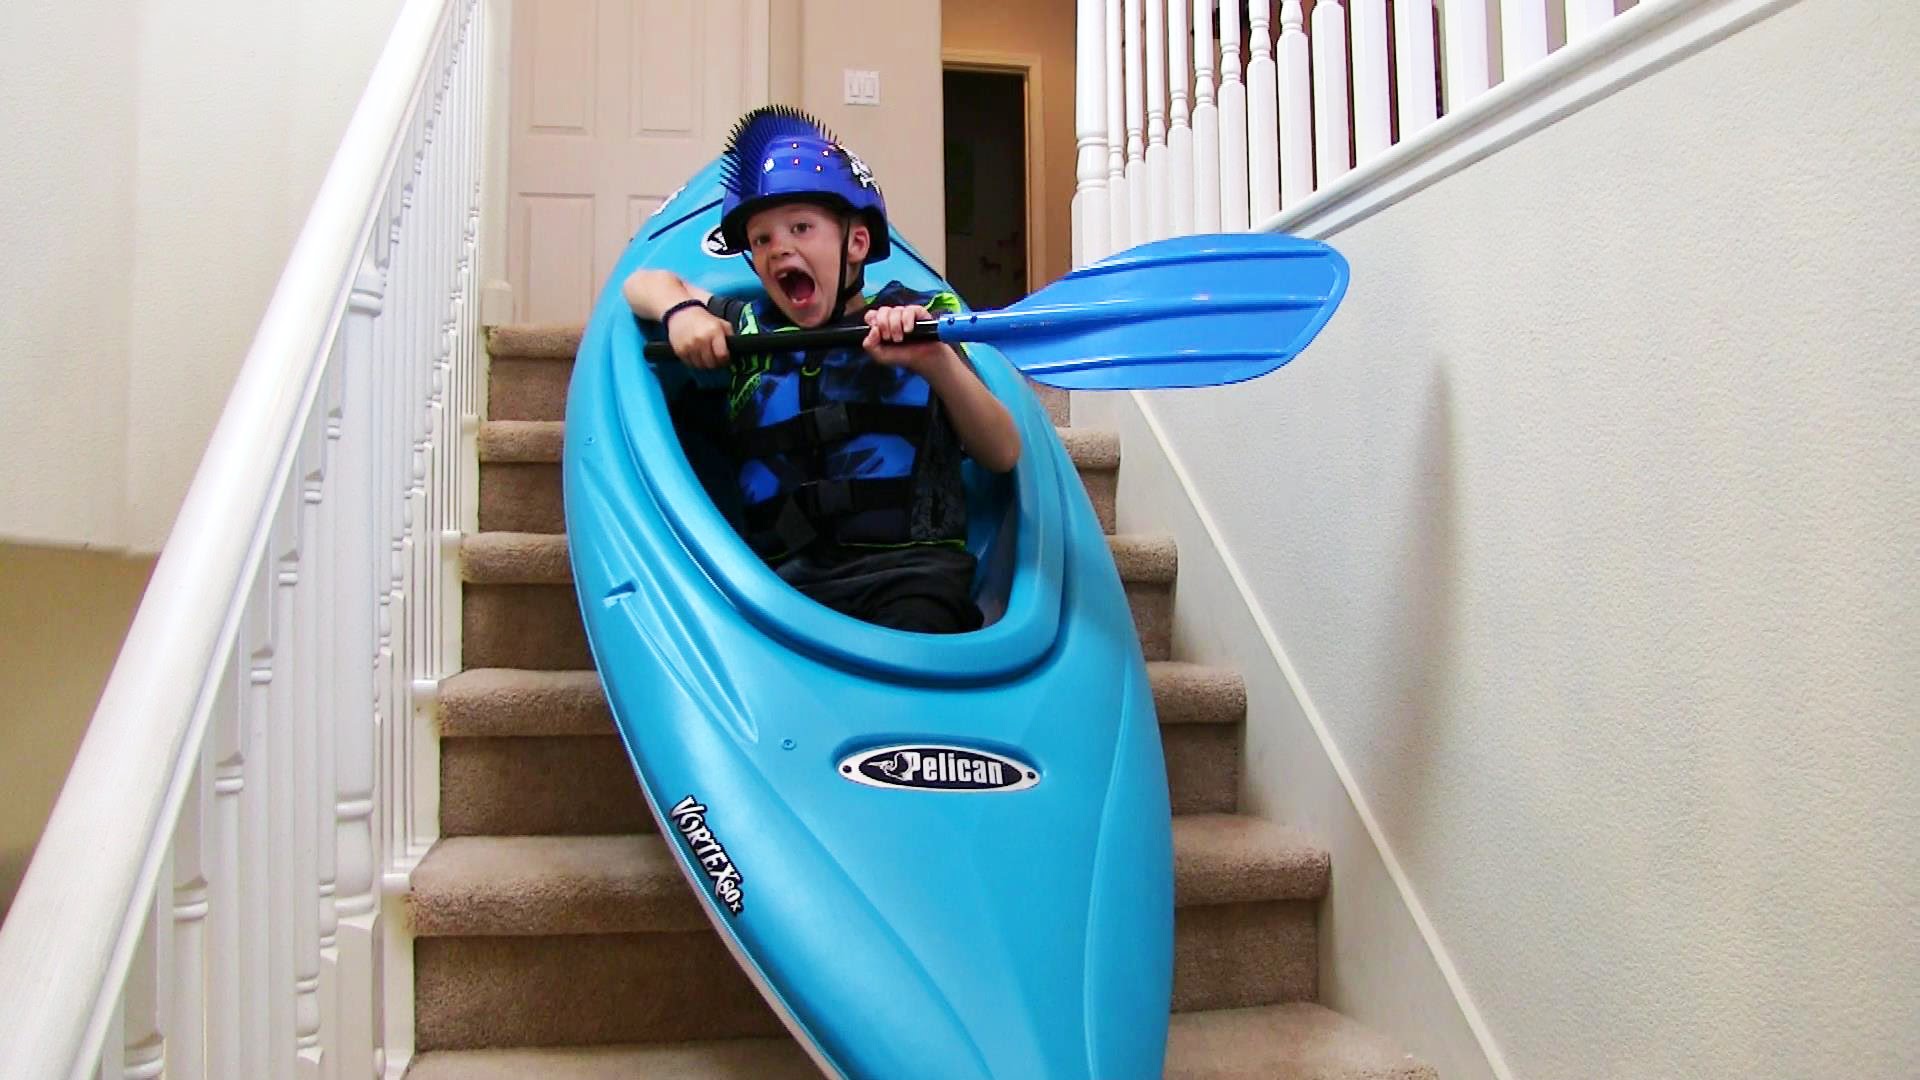 Kayaking Down the Stairs